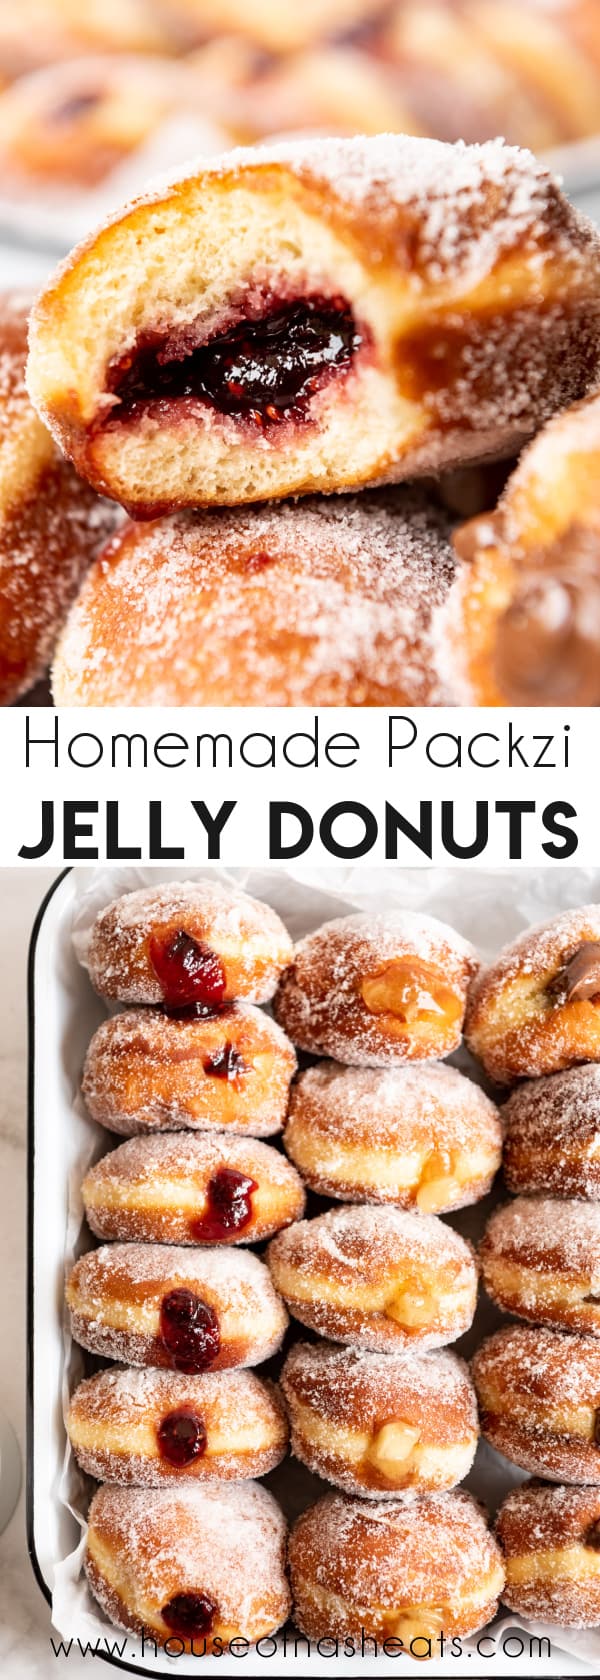 A collage of jelly filled donuts with text overlay.